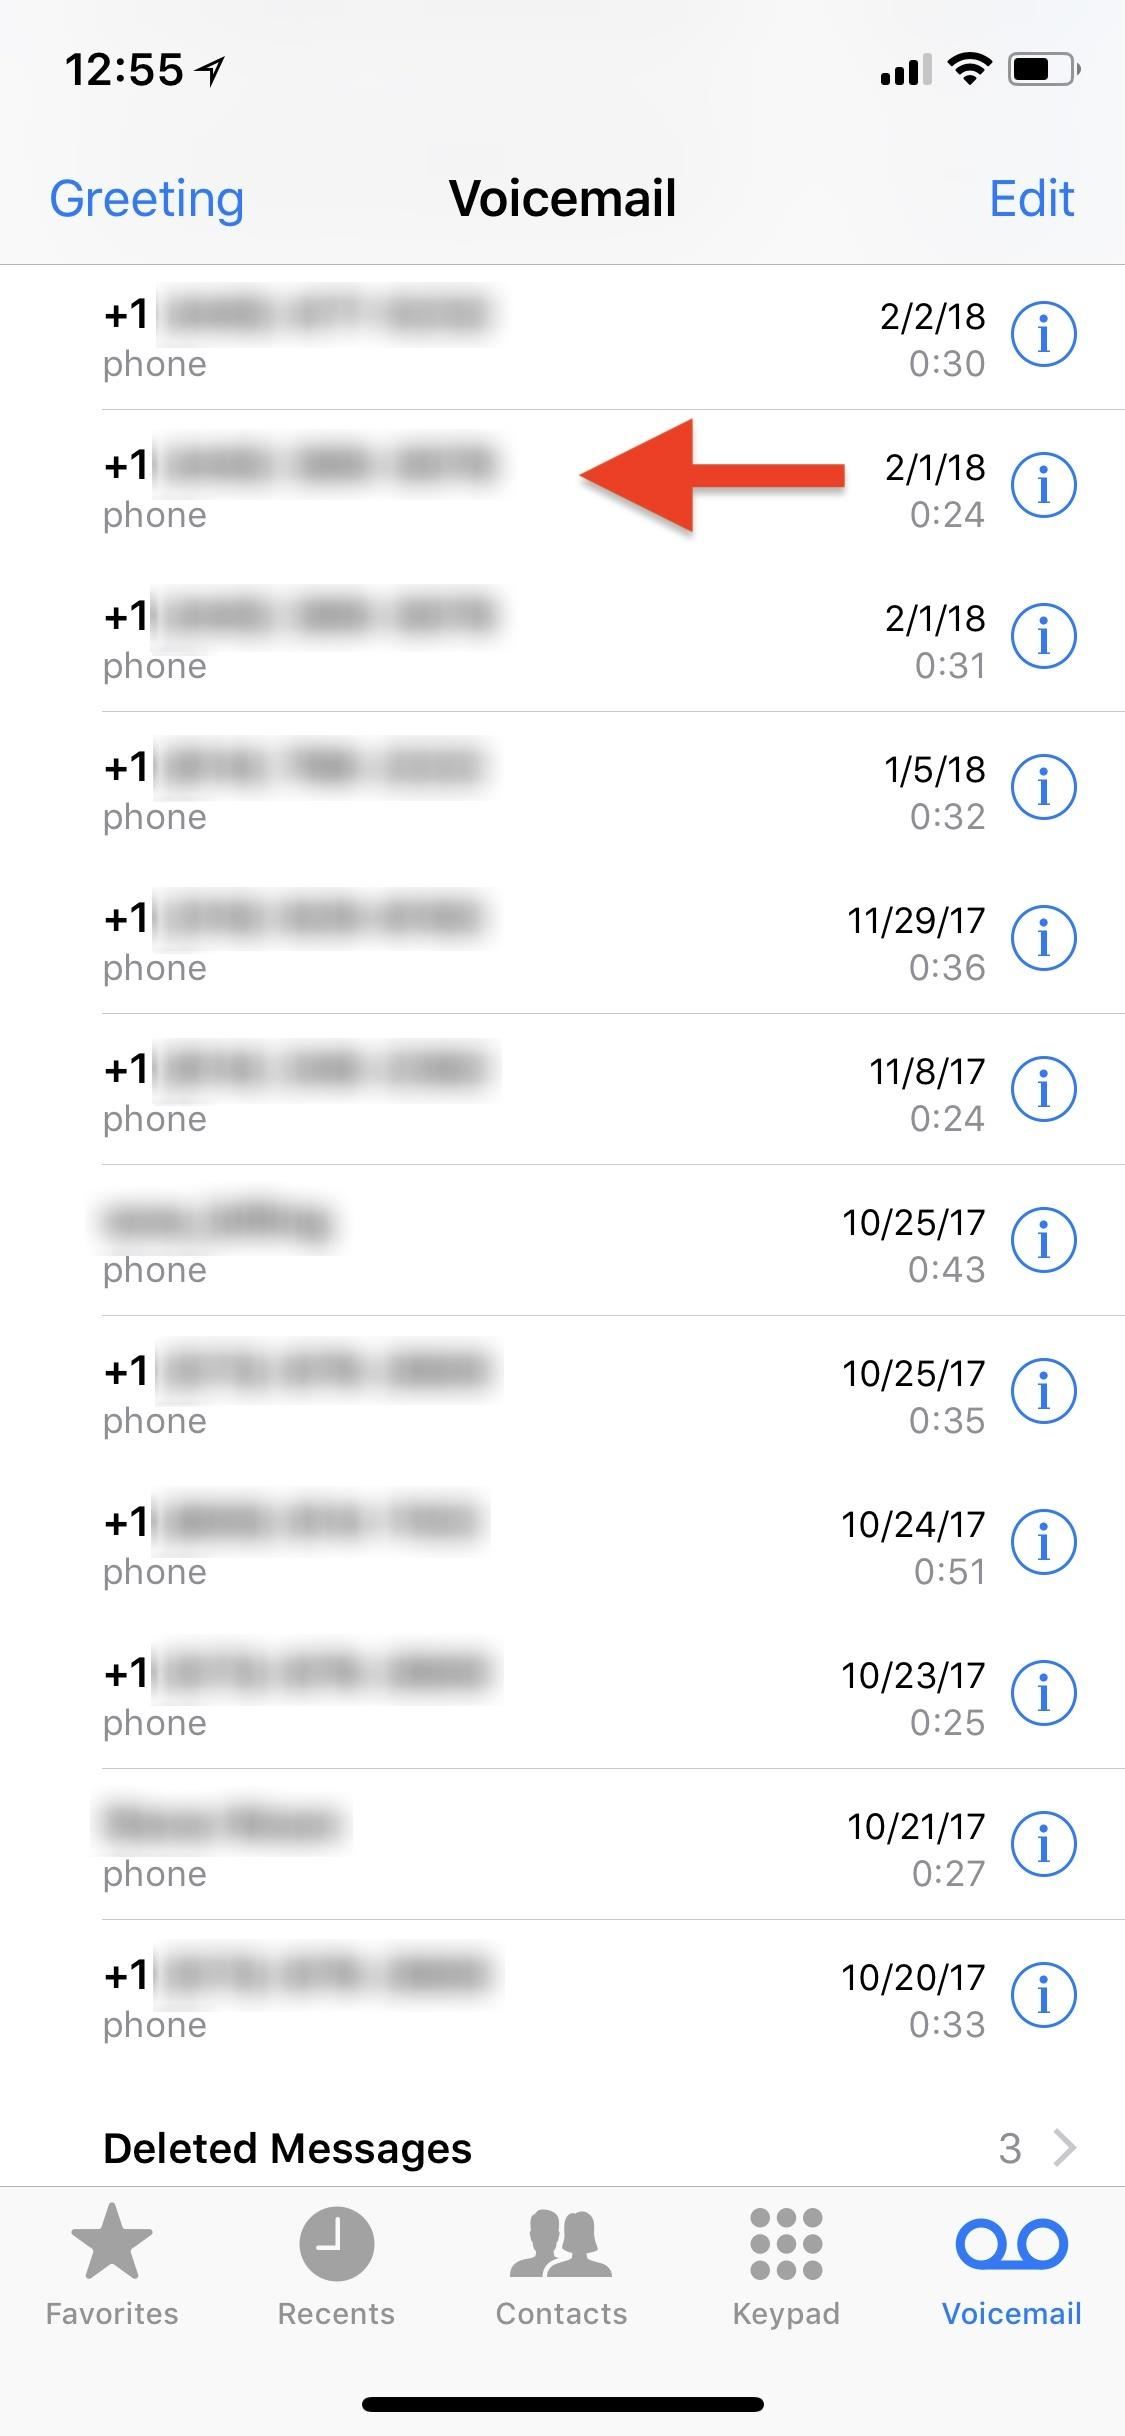 How to Share, Forward & Save Voicemails on Your iPhone